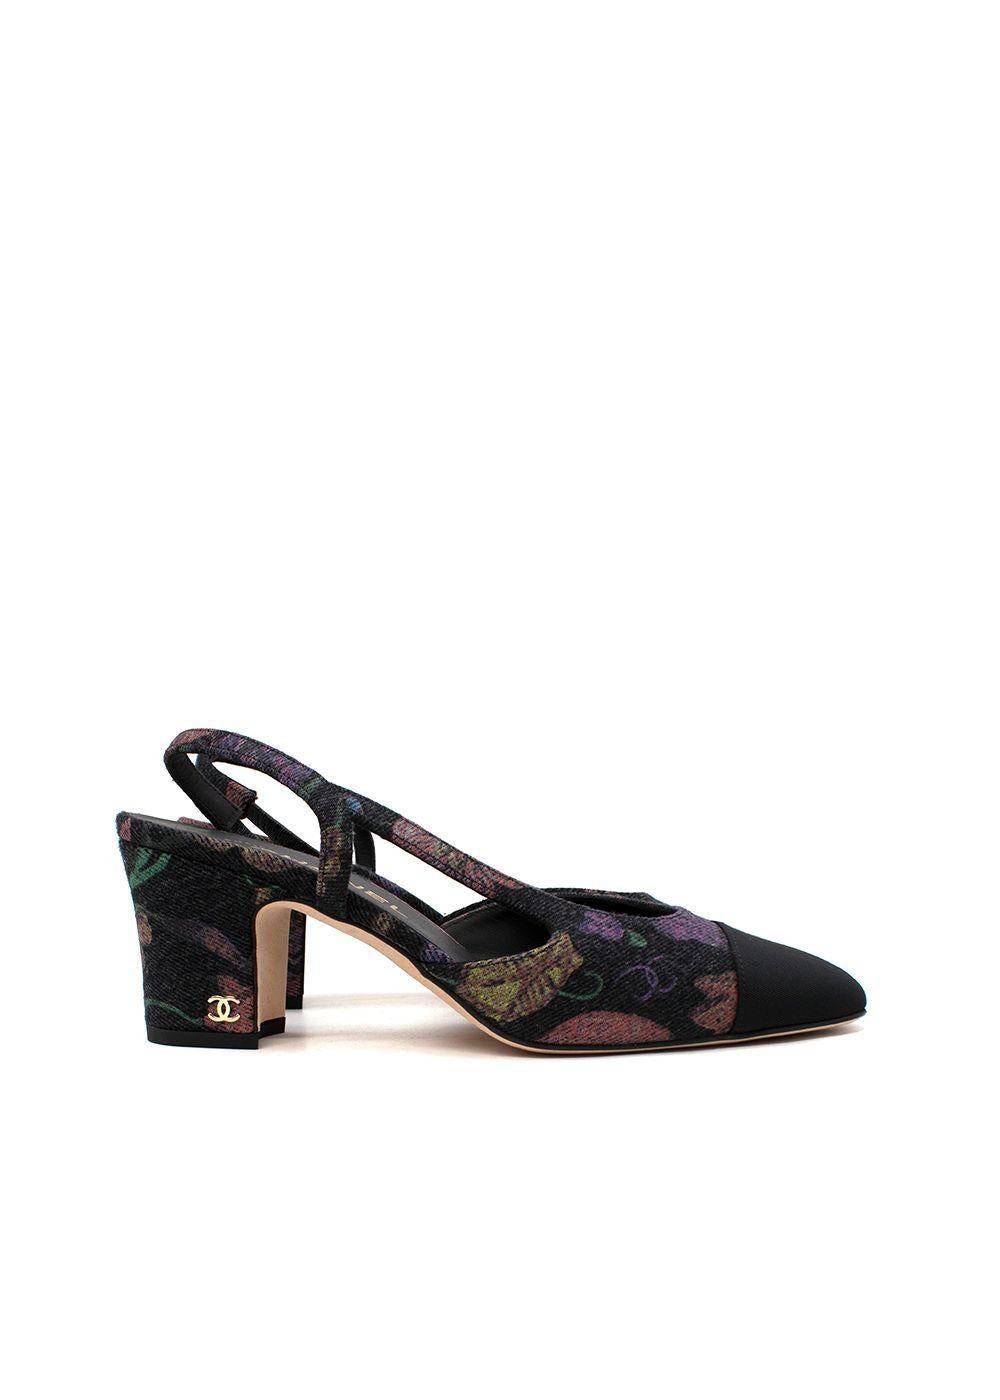 Chanel Printed Canvas Block Heeled Slingback Pumps

- Muted multicolour floral design on charcoal canvas
- Black grosgrain toe caps
- CC logo adorns the canvas wrapped block heel
- Elasticated slingback strap
- Leather